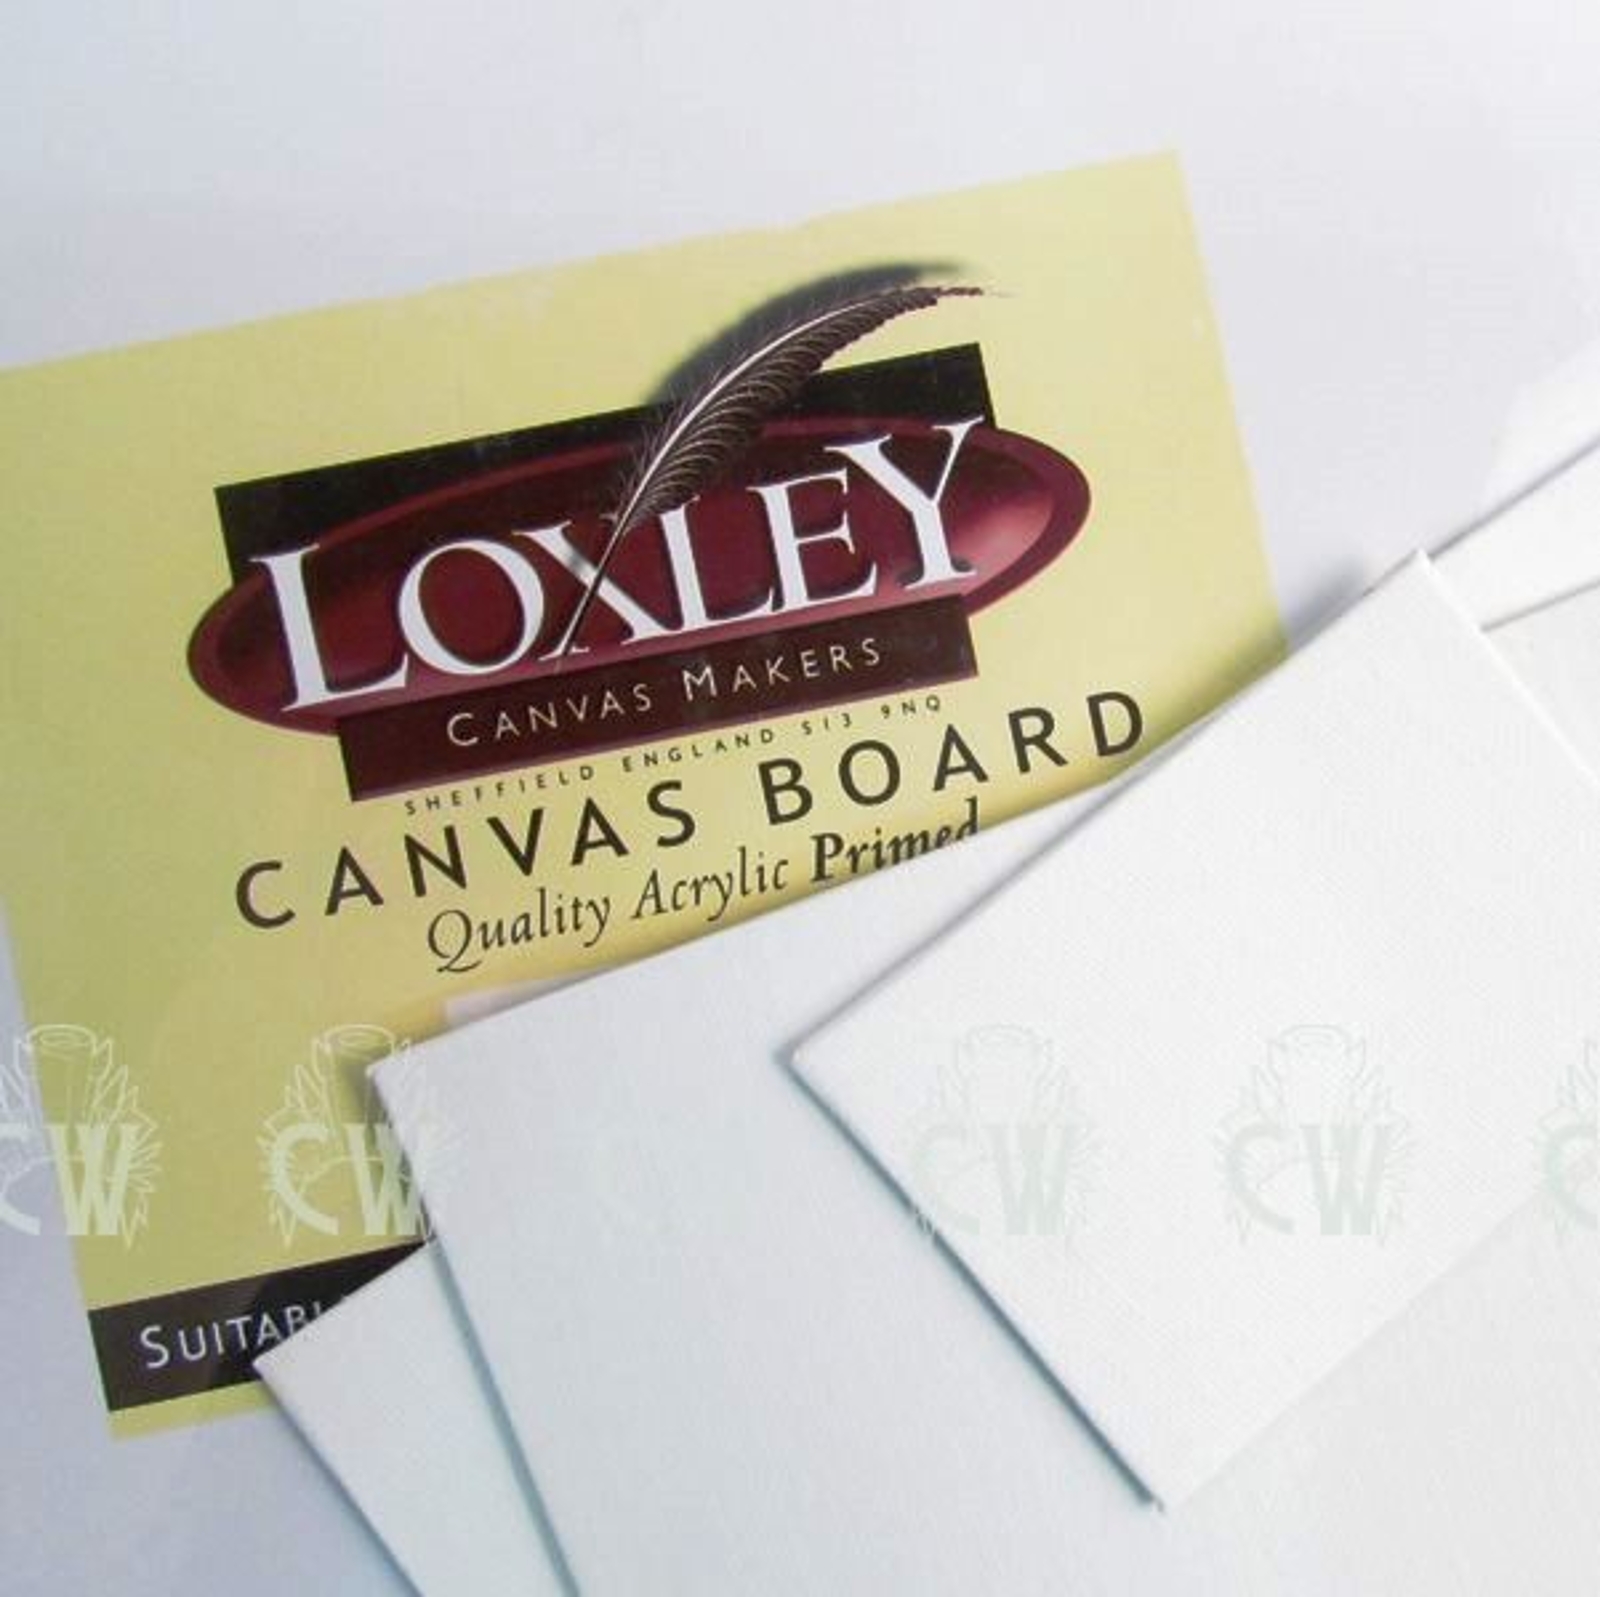 8 x 8 Artists Square Blank Canvas Board Acrylic Primed Loxley 